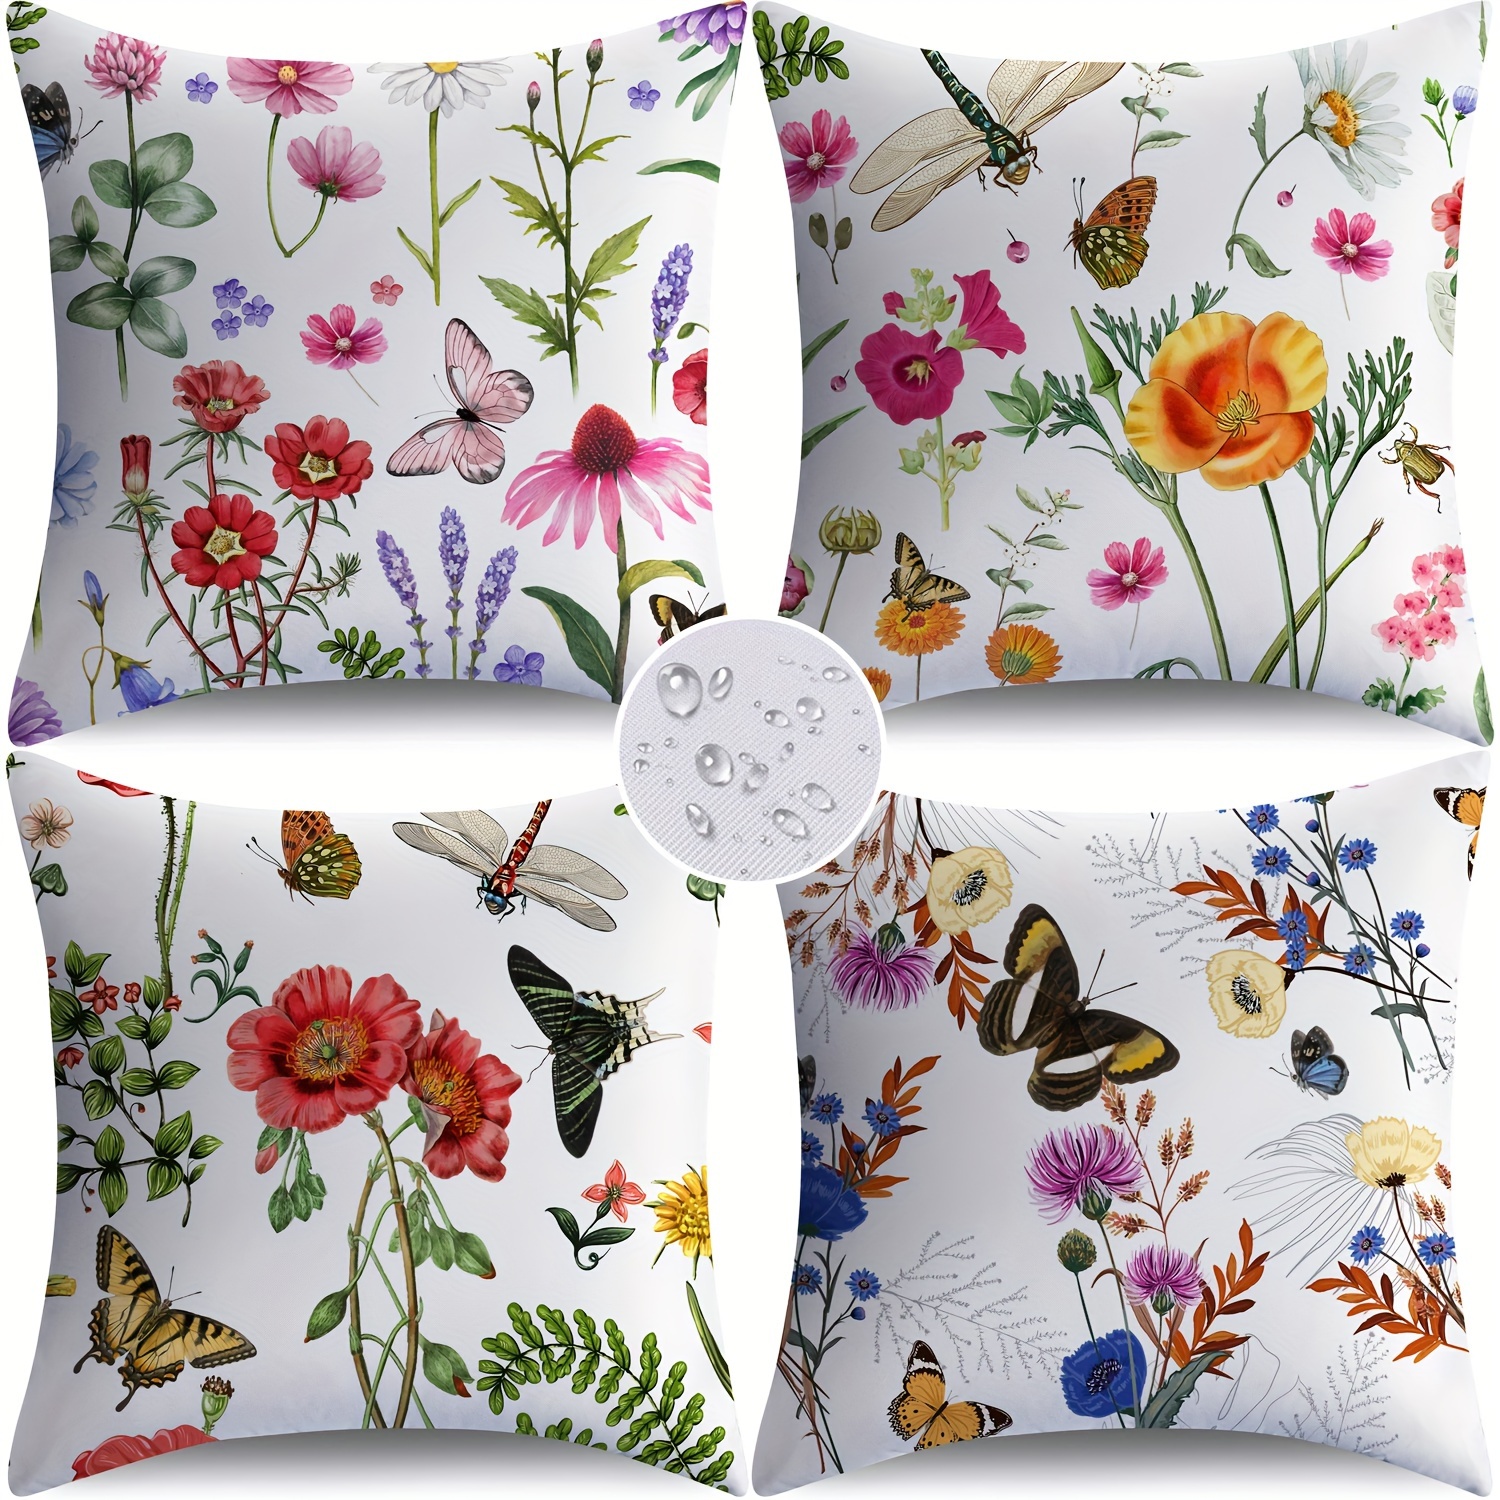 

4 Pcs 18x18in (45x45cm) Waterproof Outdoor Throw Pillow Covers - Floral Design, Hypoallergenic Polyester, Hidden Zipper, Suitable For Multiple Room Types